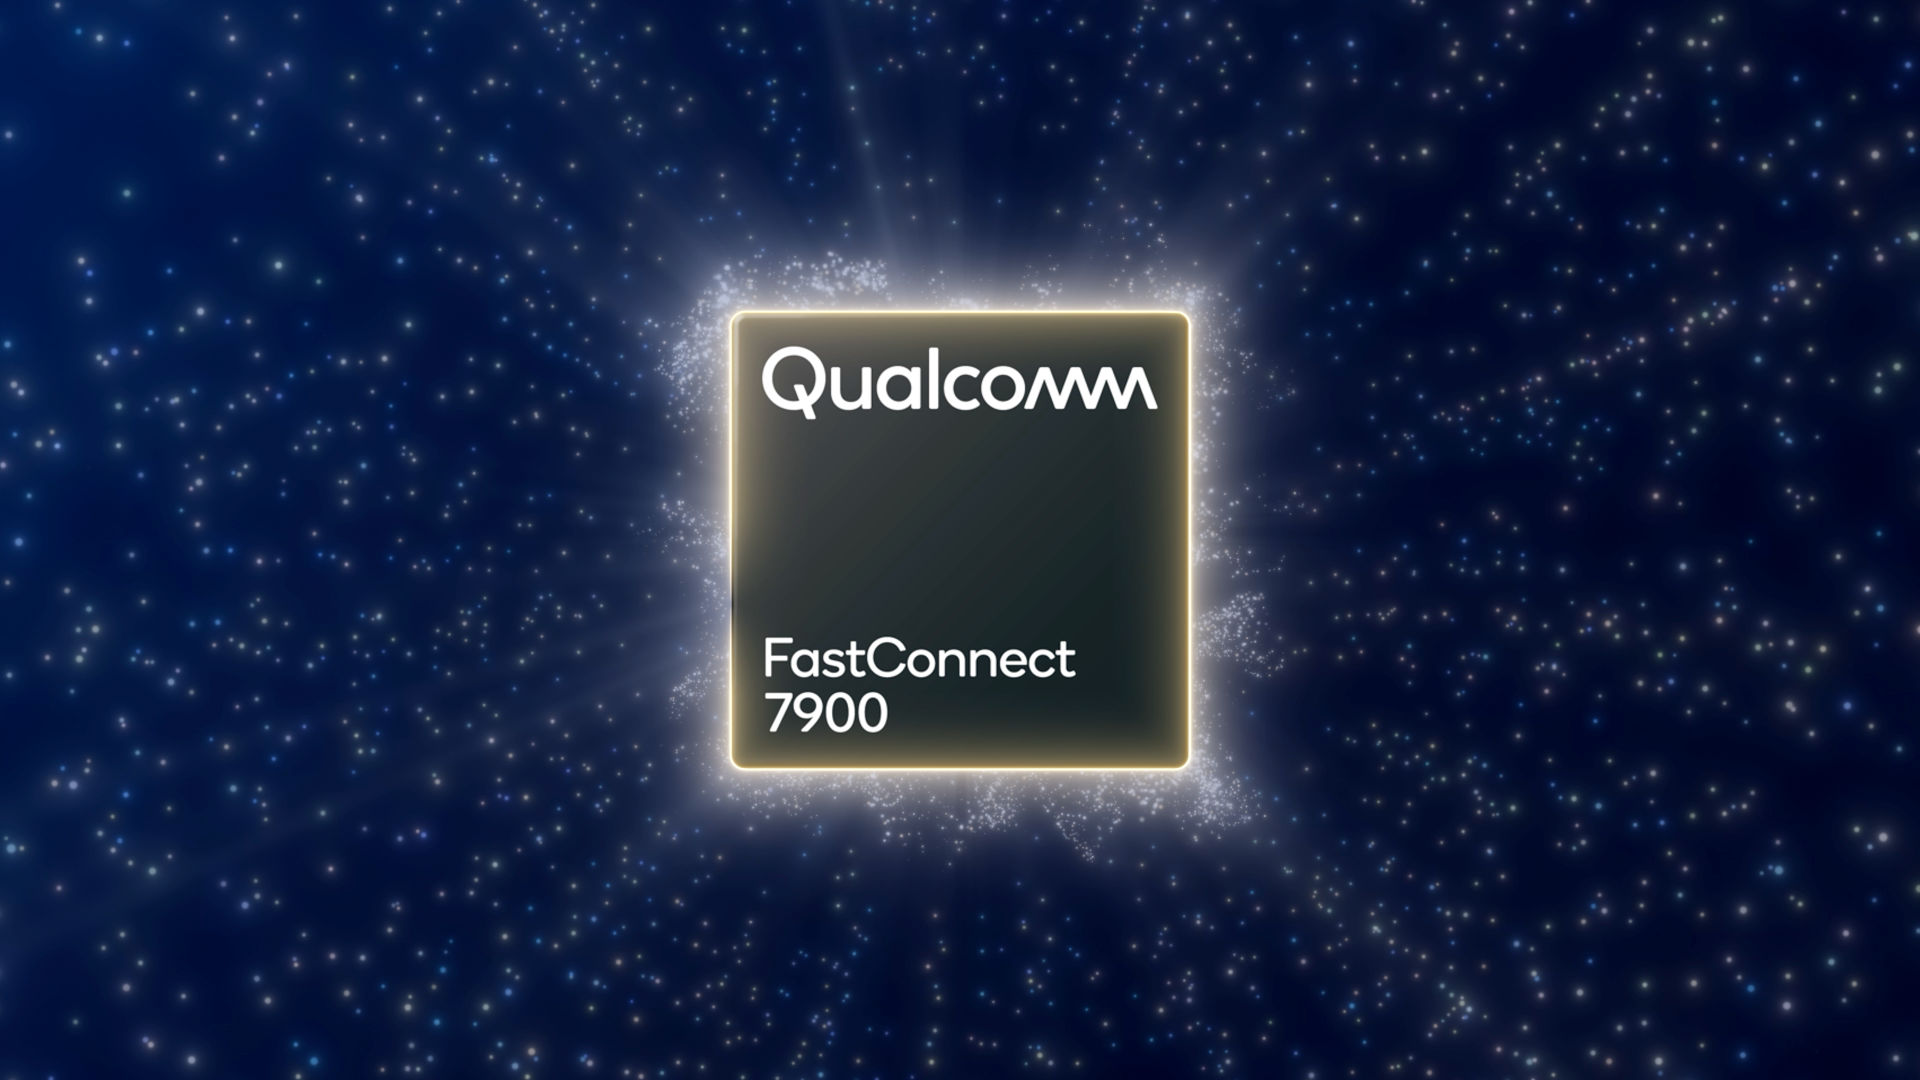 Qualcomm Fast Connect 7900